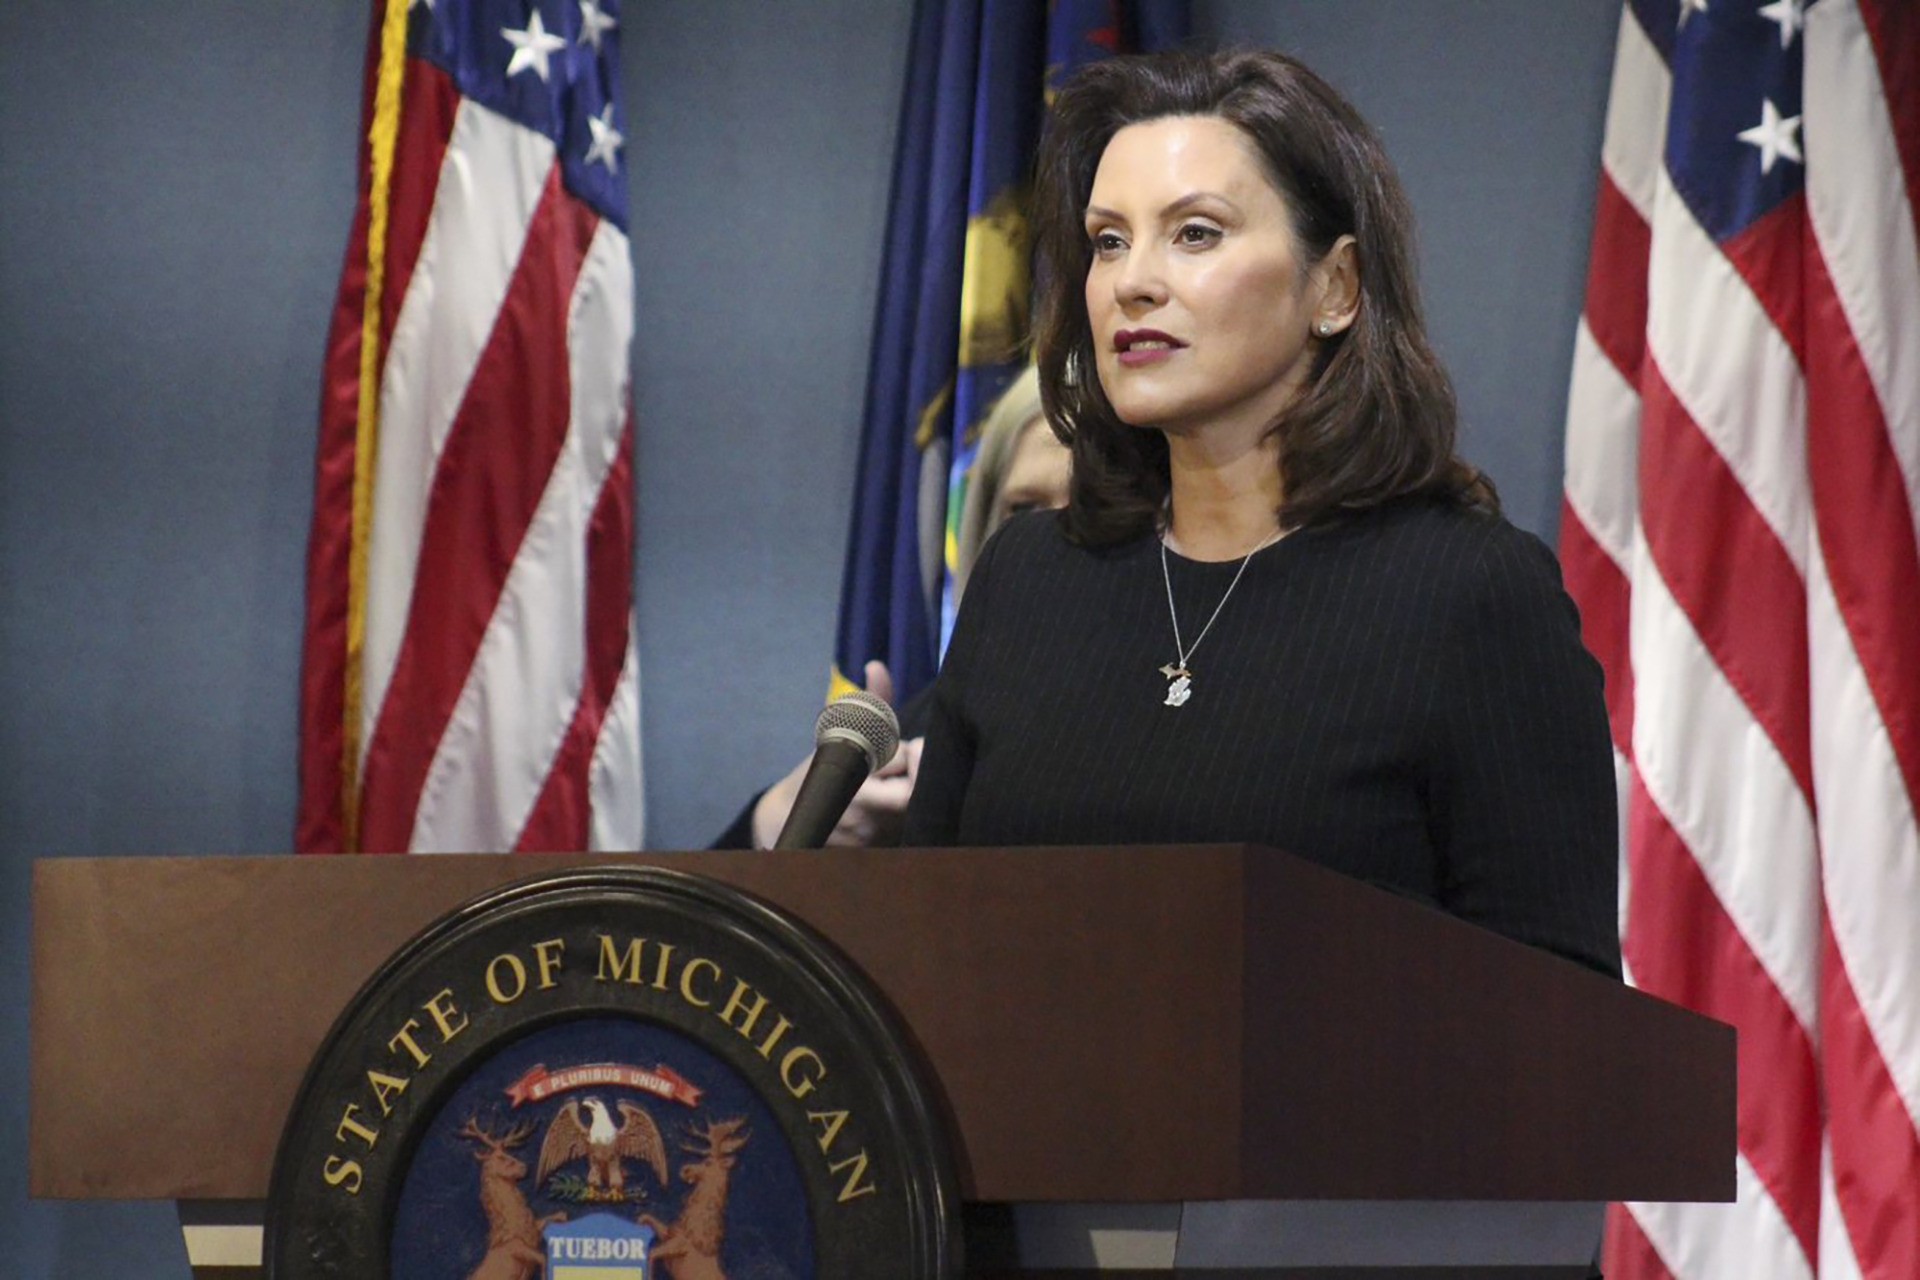 This photo provided by the Michigan Office of the Governor, Michigan Gov. Gretchen Whitmer addresses the state during a speech in Lansing, Mich., Wednesday, April 29, 2020. The governor on Wednesday proposed free college for health care workers and others involved in the coronavirus fight, likening their service during the pandemic to soldiers who got a free education after returning home from World War II. (Michigan Office of the Governor via AP, Pool)